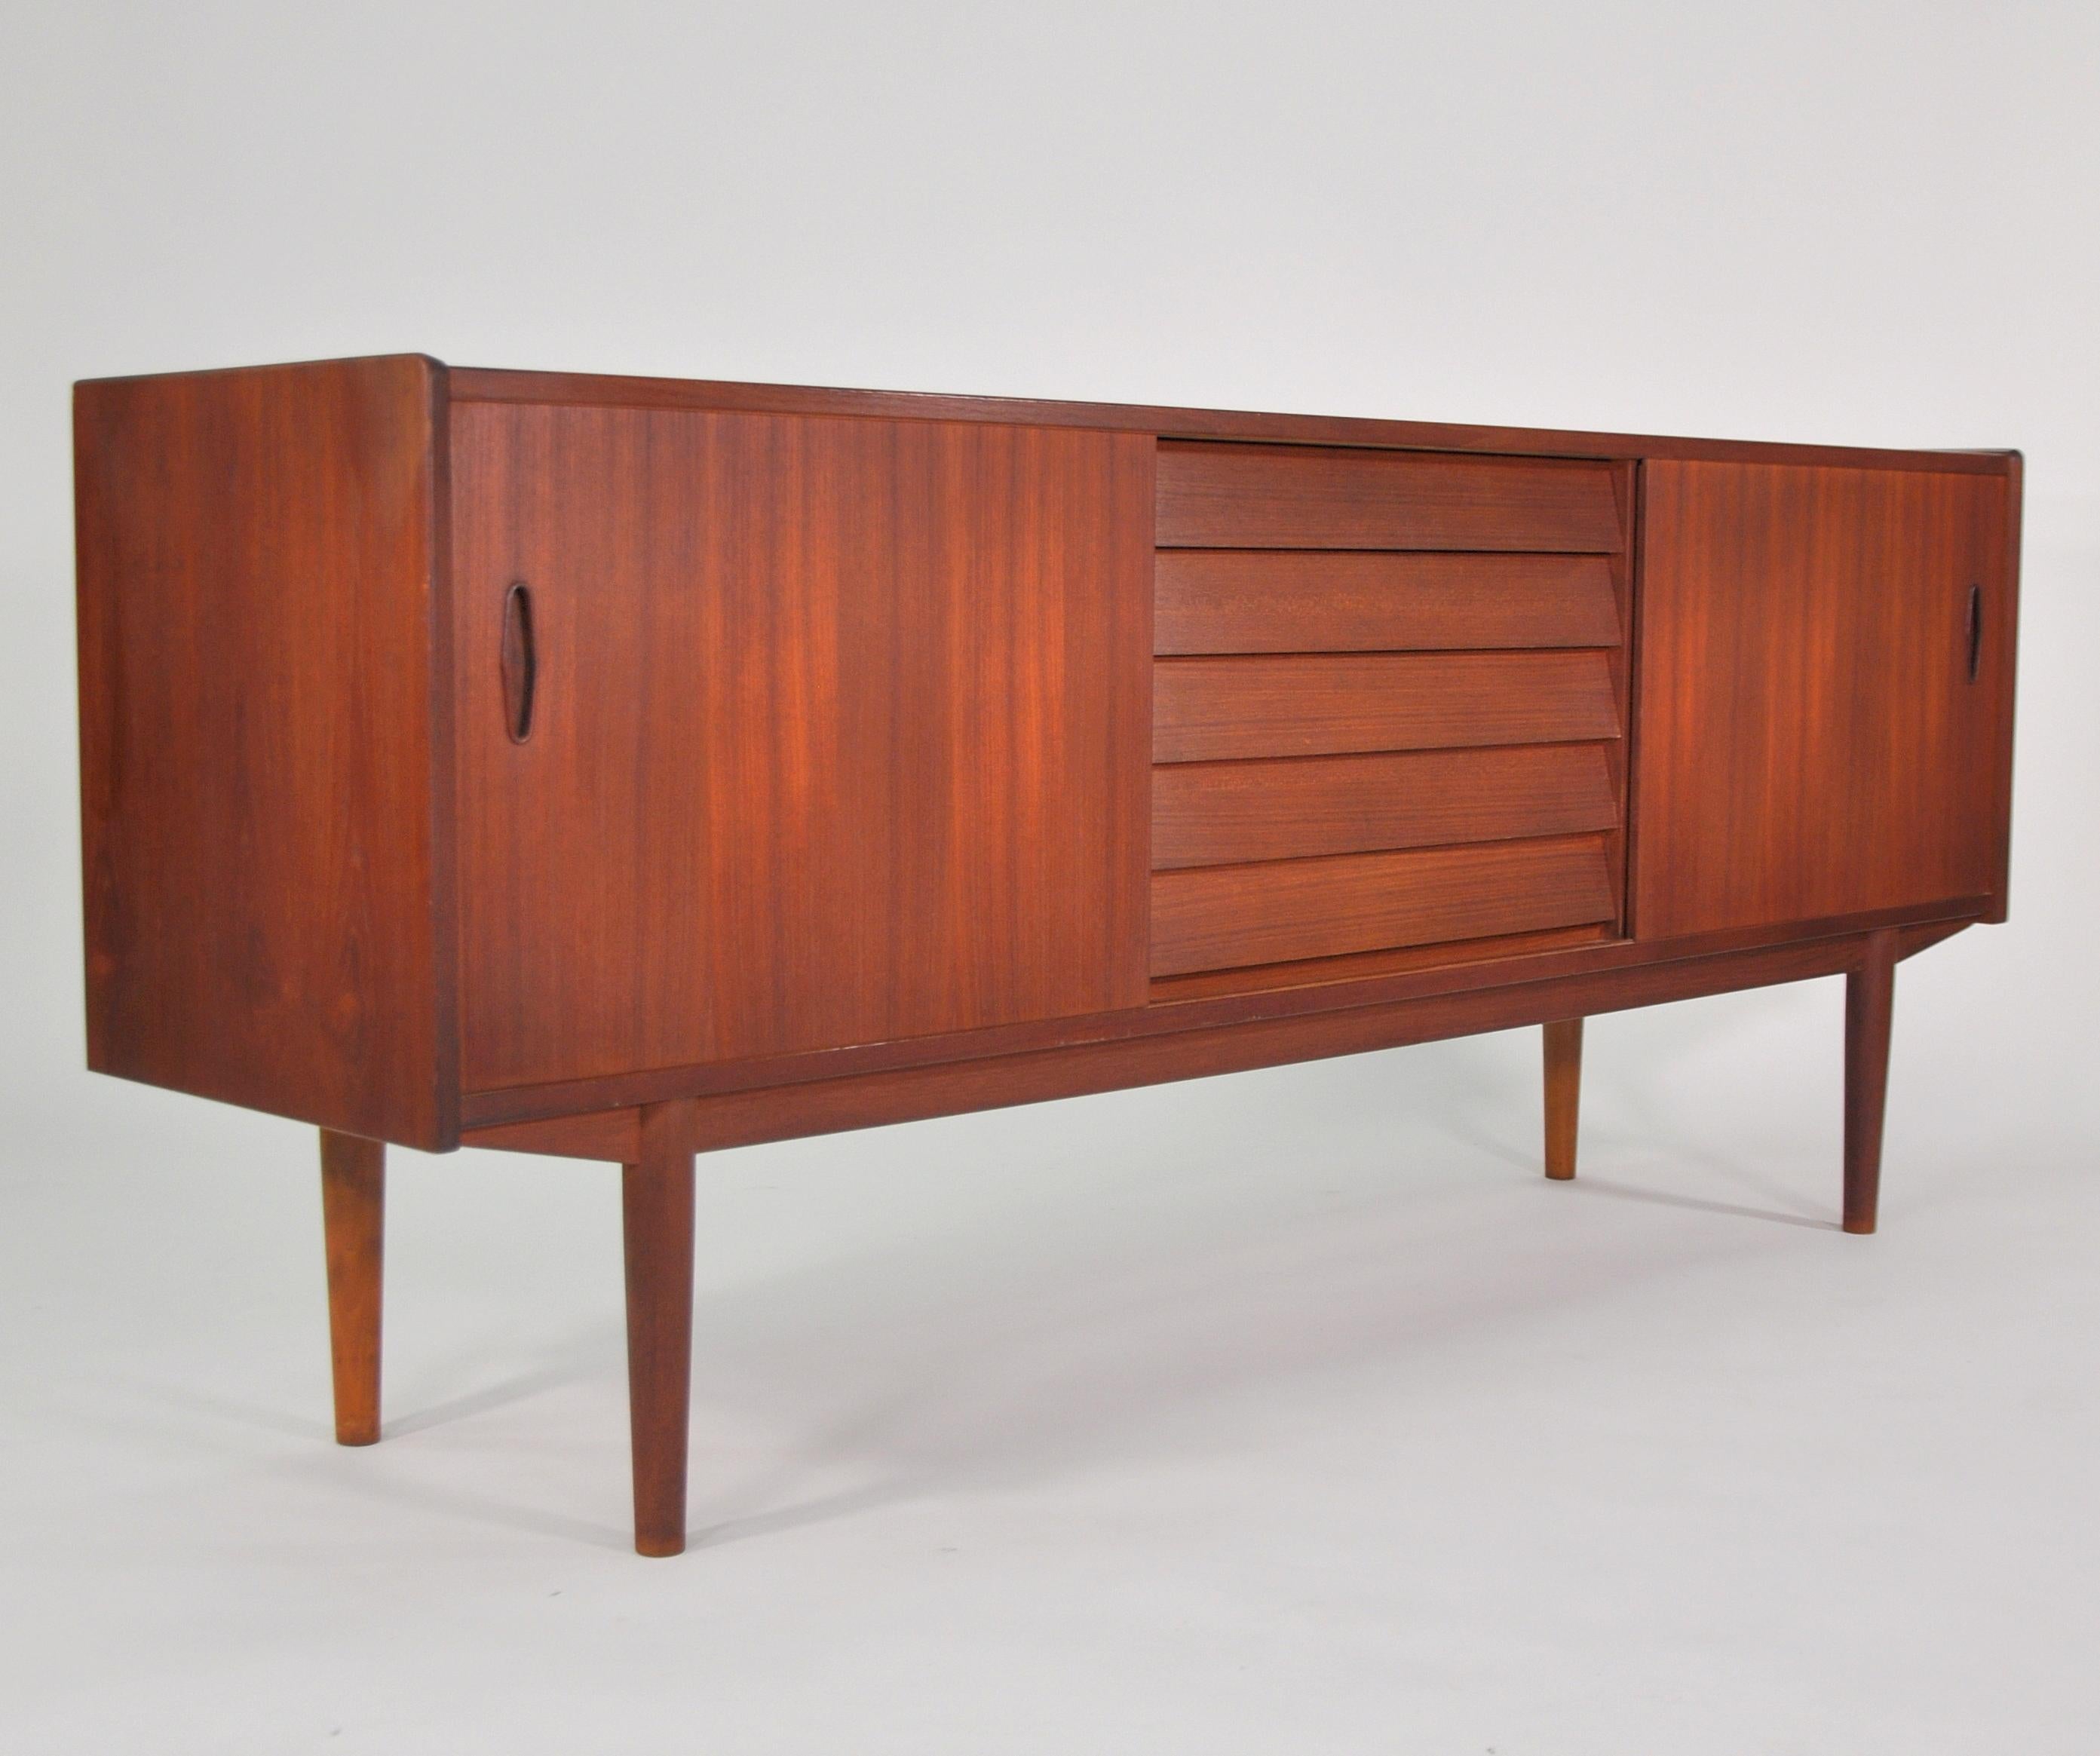 A gorgeous Mid-Century Modern trio cabinet designed by Nils Jonsson for Hugo Troeds, dating from the 1960s. The vintage sideboard features a pair of sliding doors, with a sculpted teak handle, opening to a cabinet space fitted with an adjustable